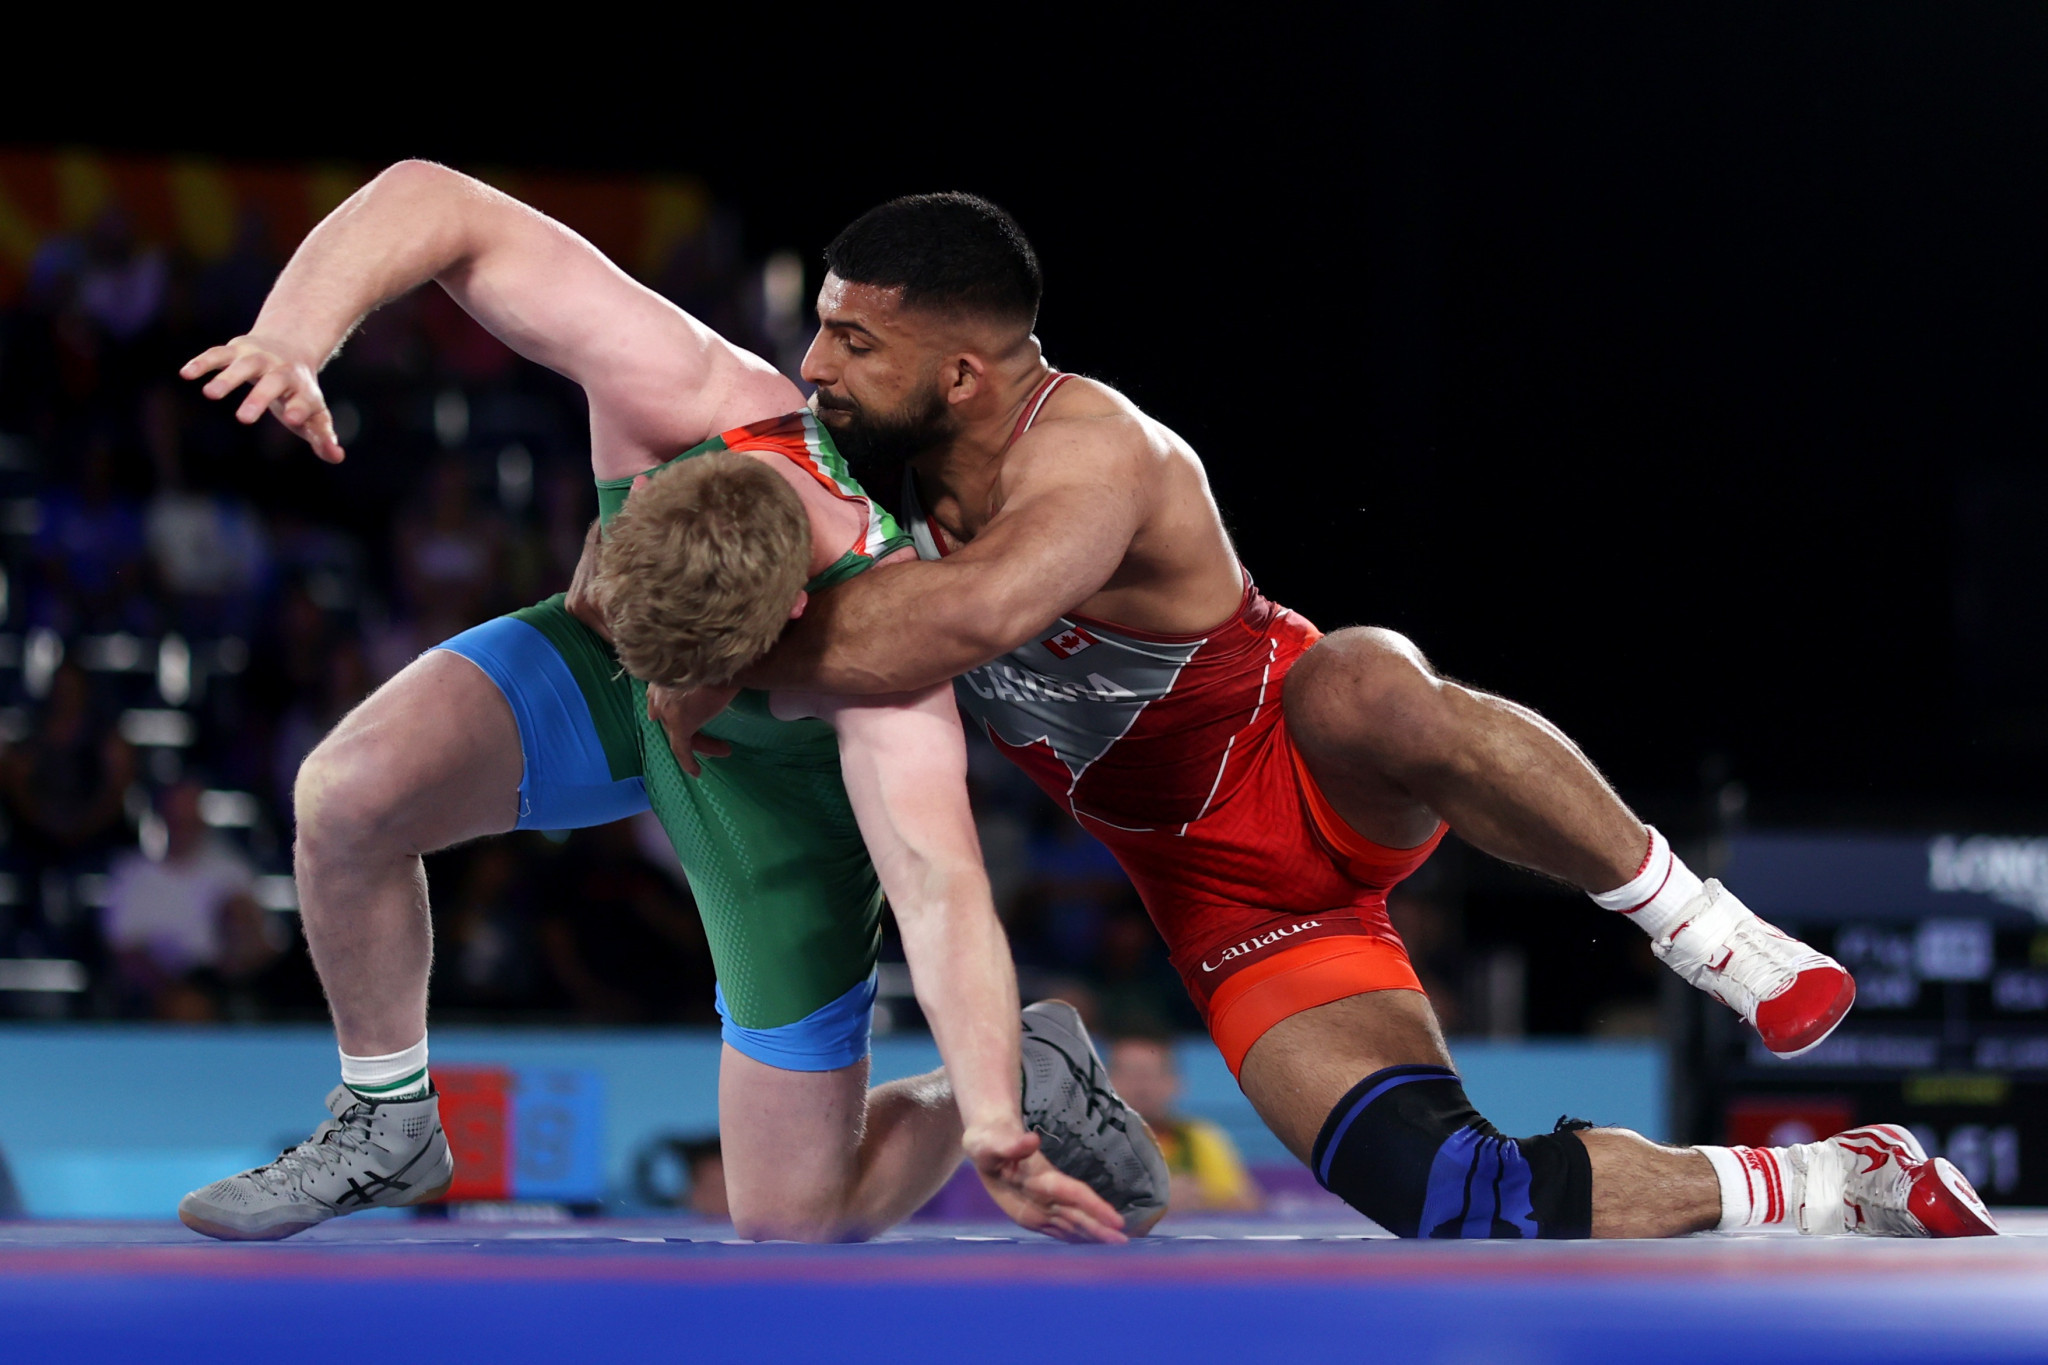 Nishan Randhawa proved too strong for Nicolaas de Lange in the men's freestyle 97kg final ©Getty Images